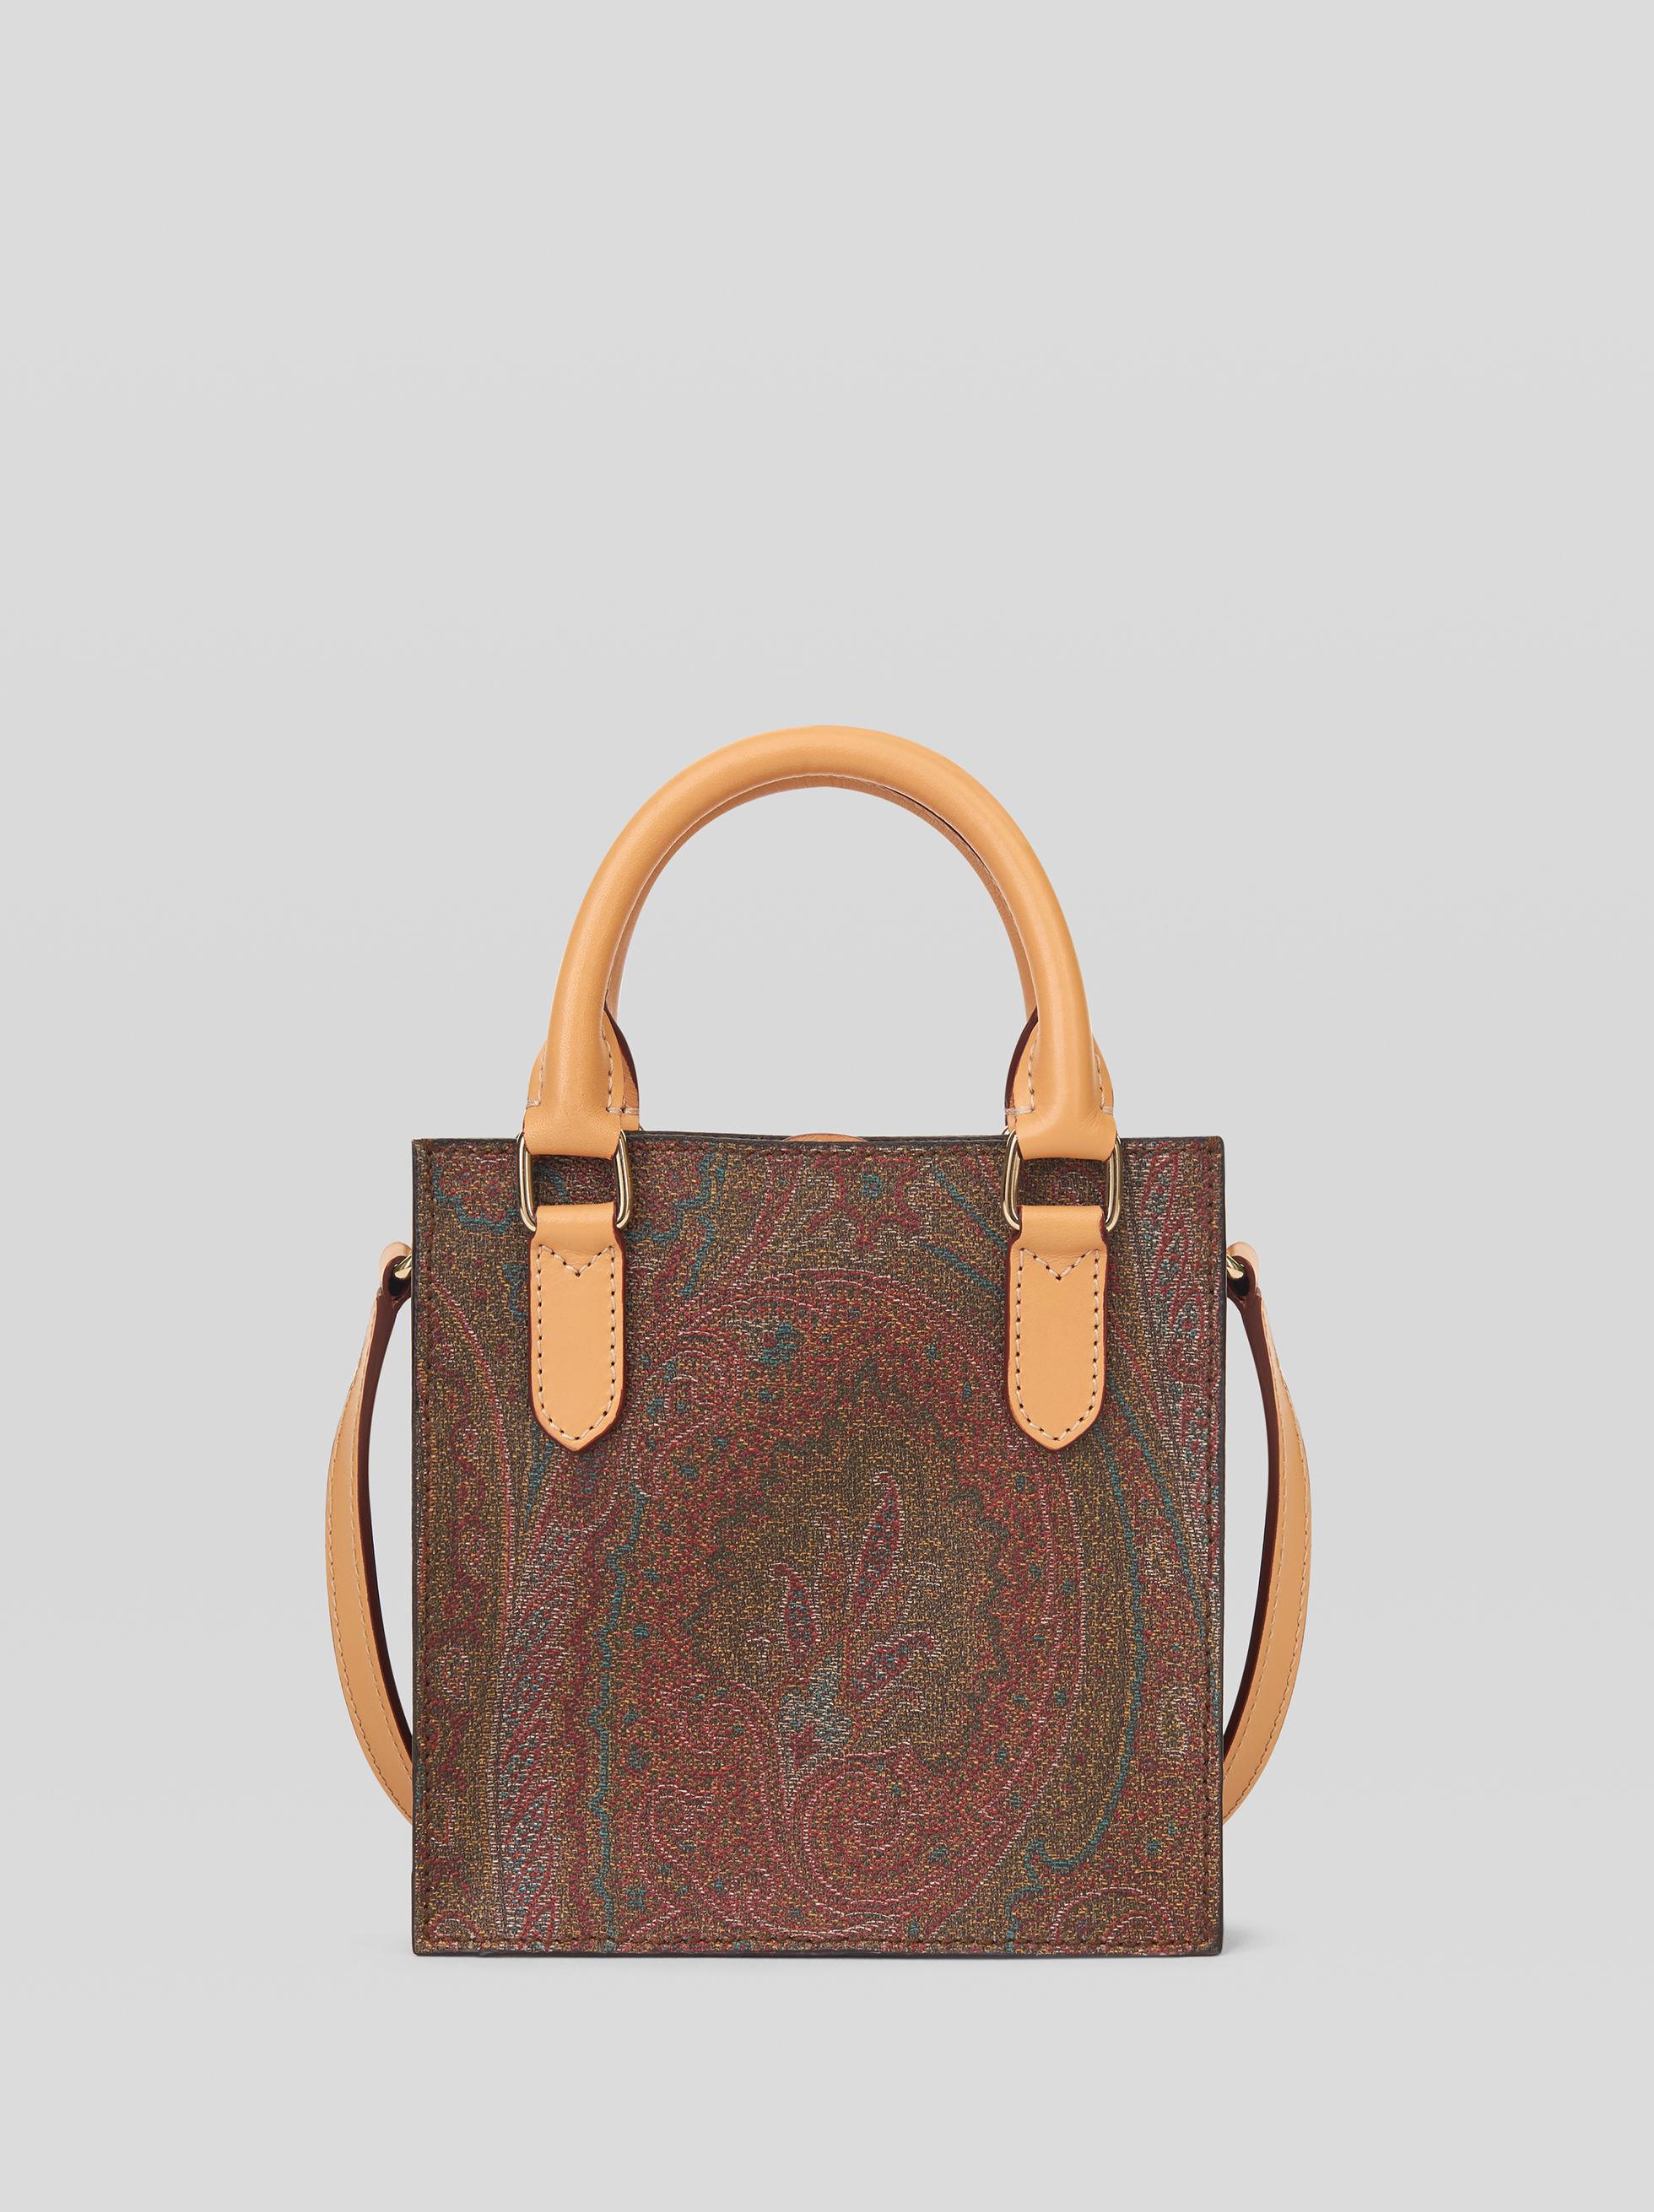 Etro Leather Mini Paisley Shopping Bag in Brown - Lyst